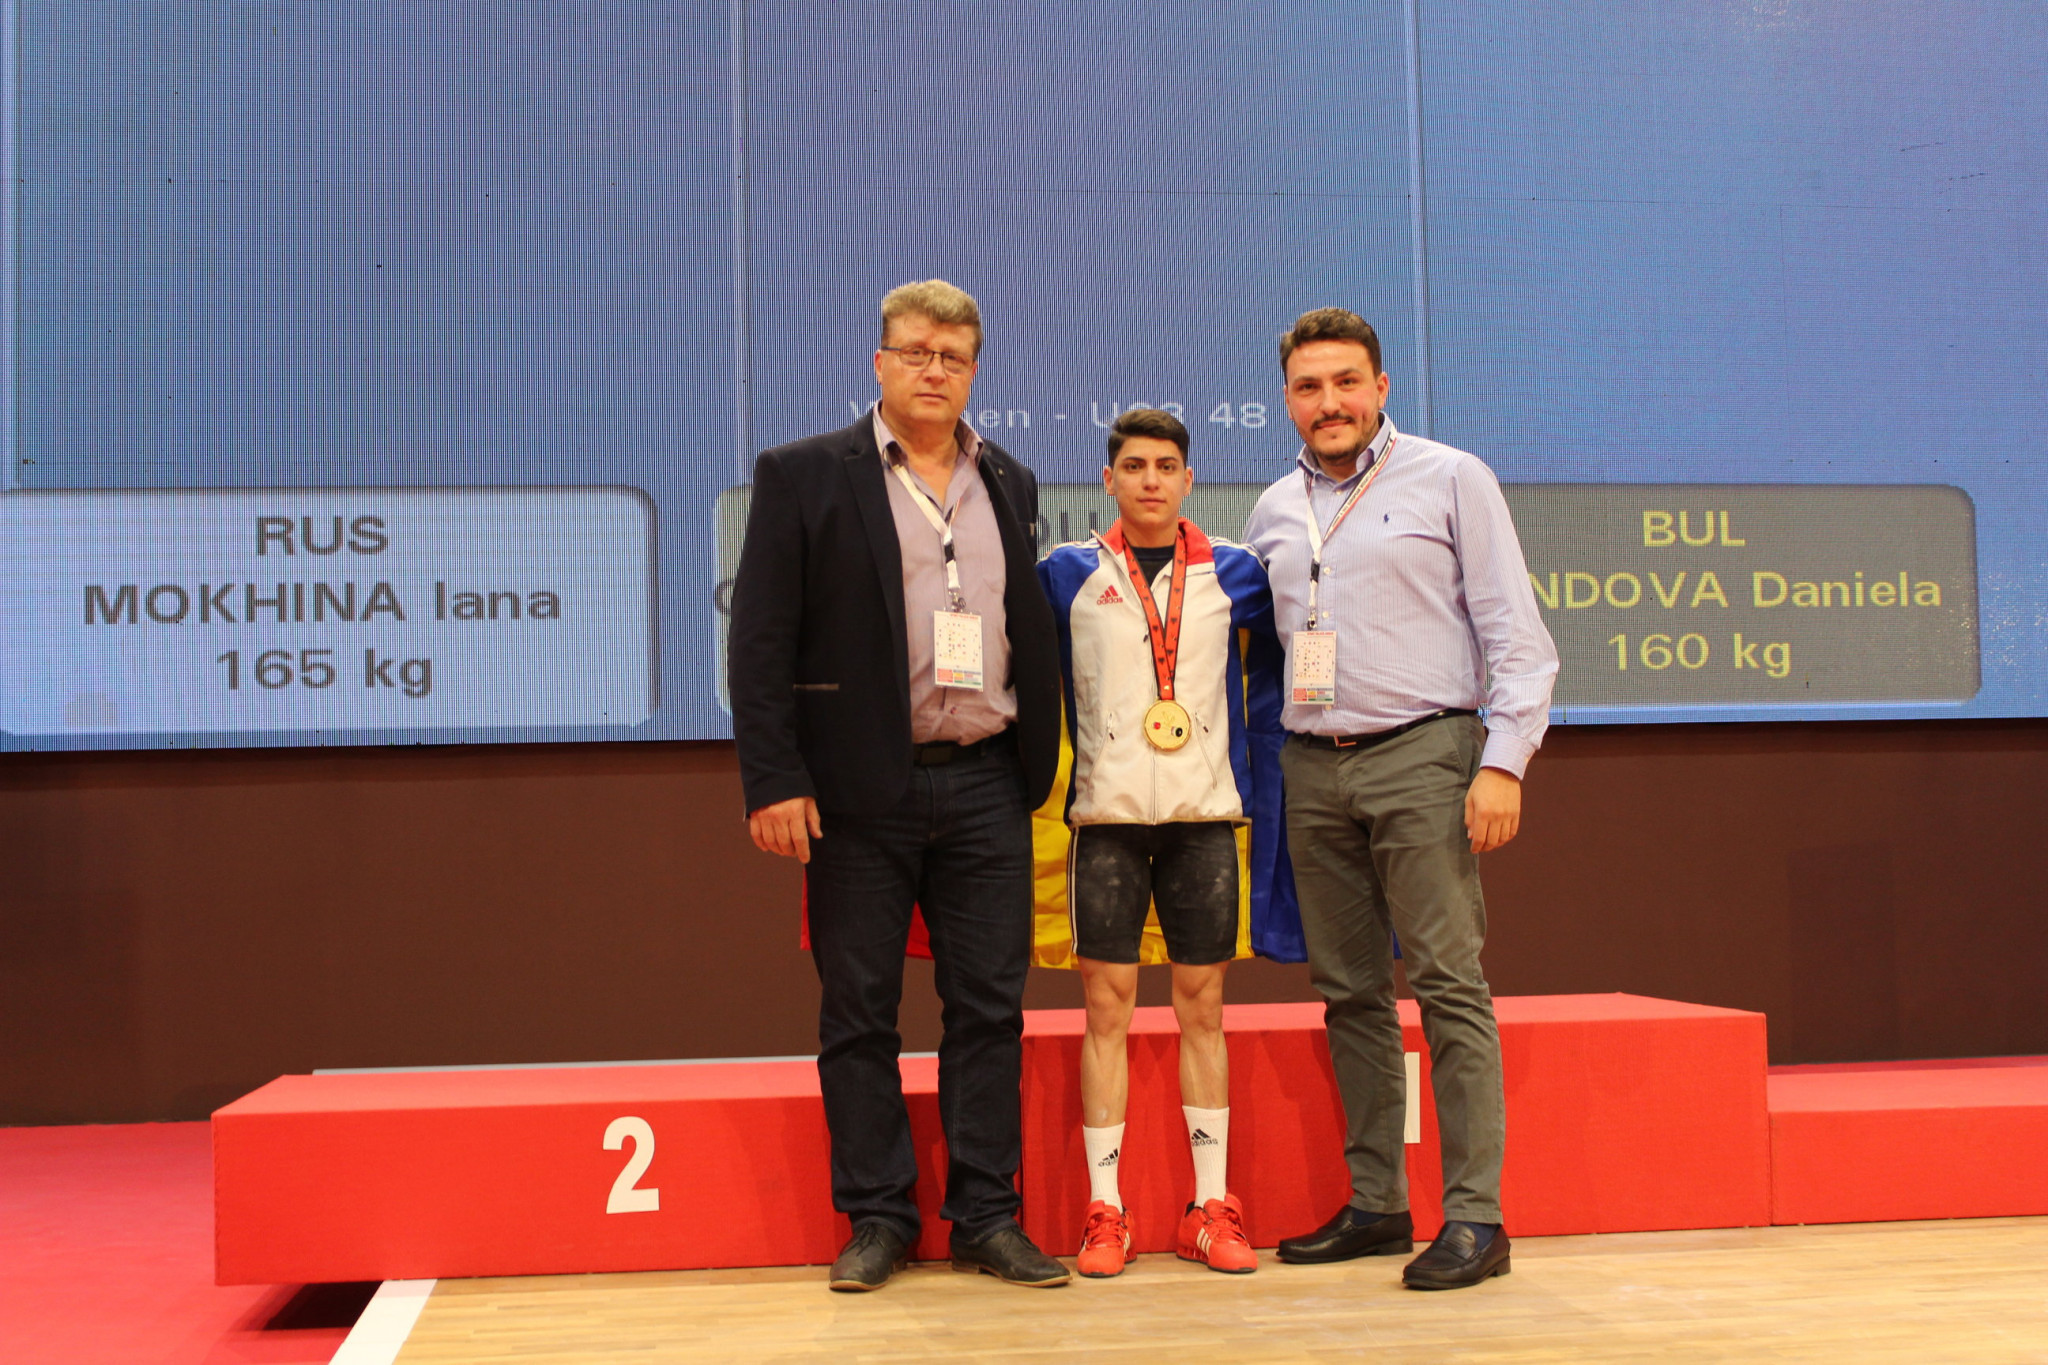 Nicu Vlad, a Romanian weightlifting legend, left, with today's gold medallist Monica Csengeri and Alex Padure, secretary general of the Romanian Weightlifting Federation, right ©RWF